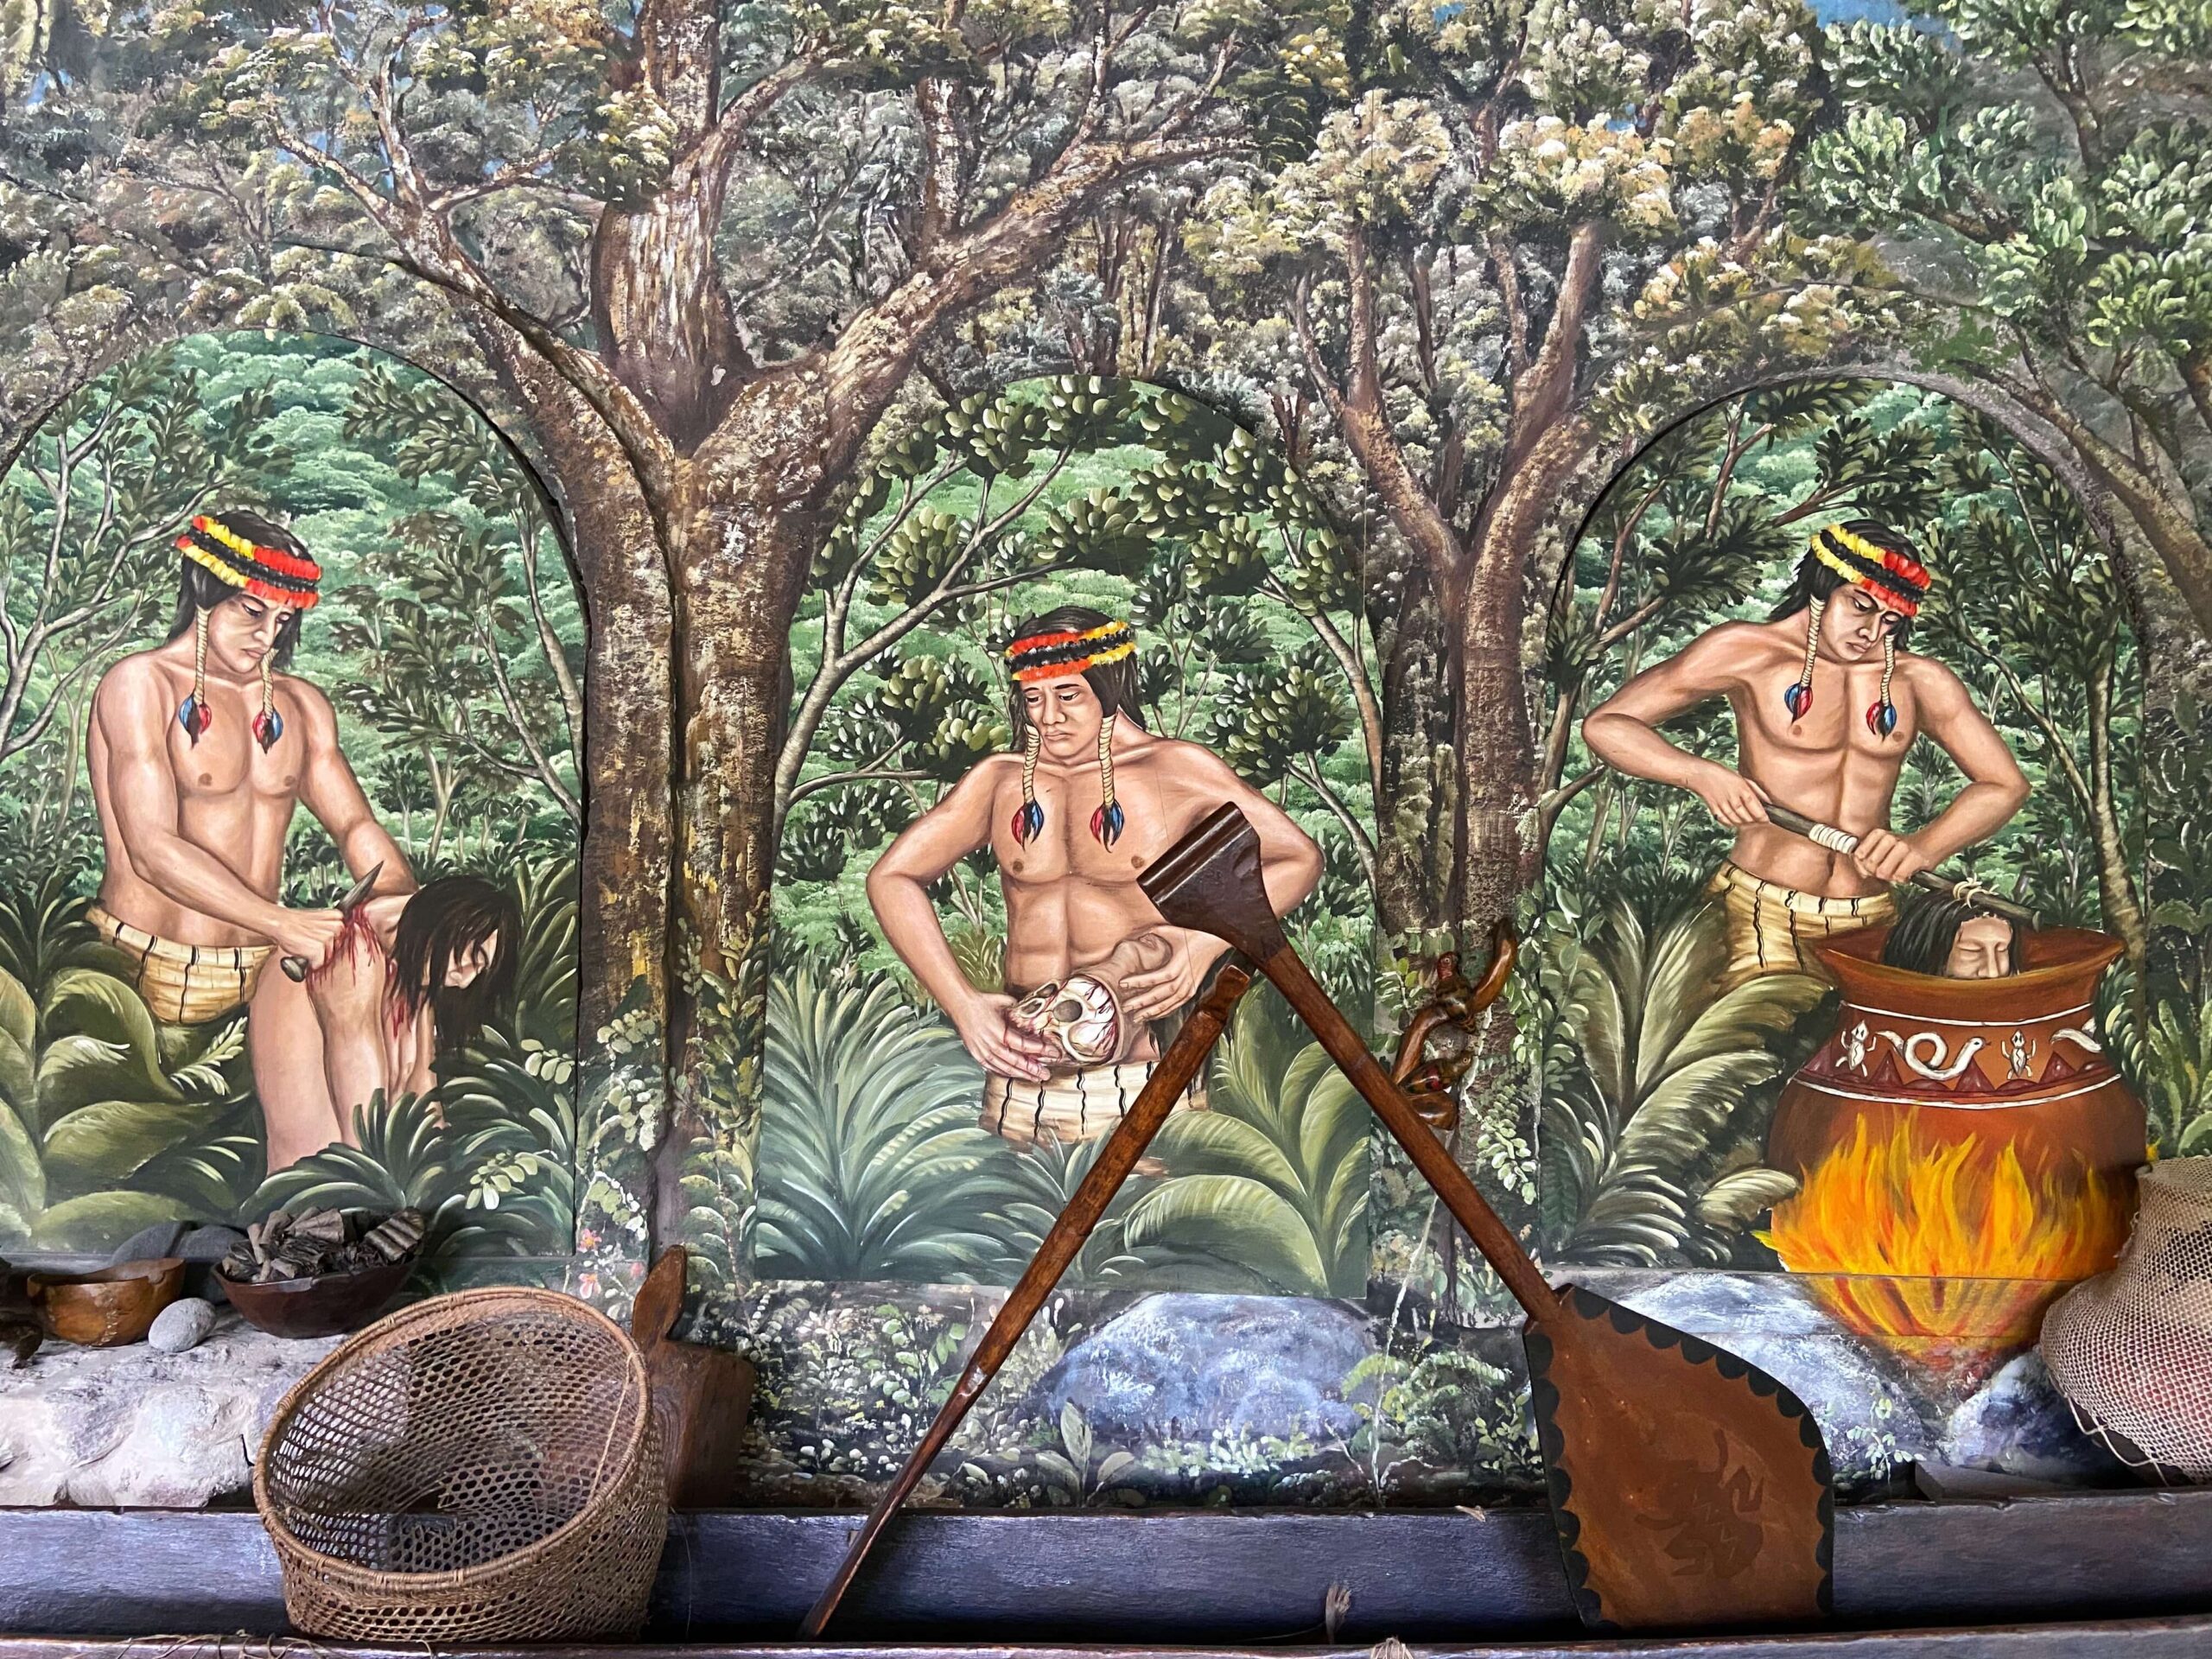 Painting of Indigenous Amazon Tribes shrinking a human head